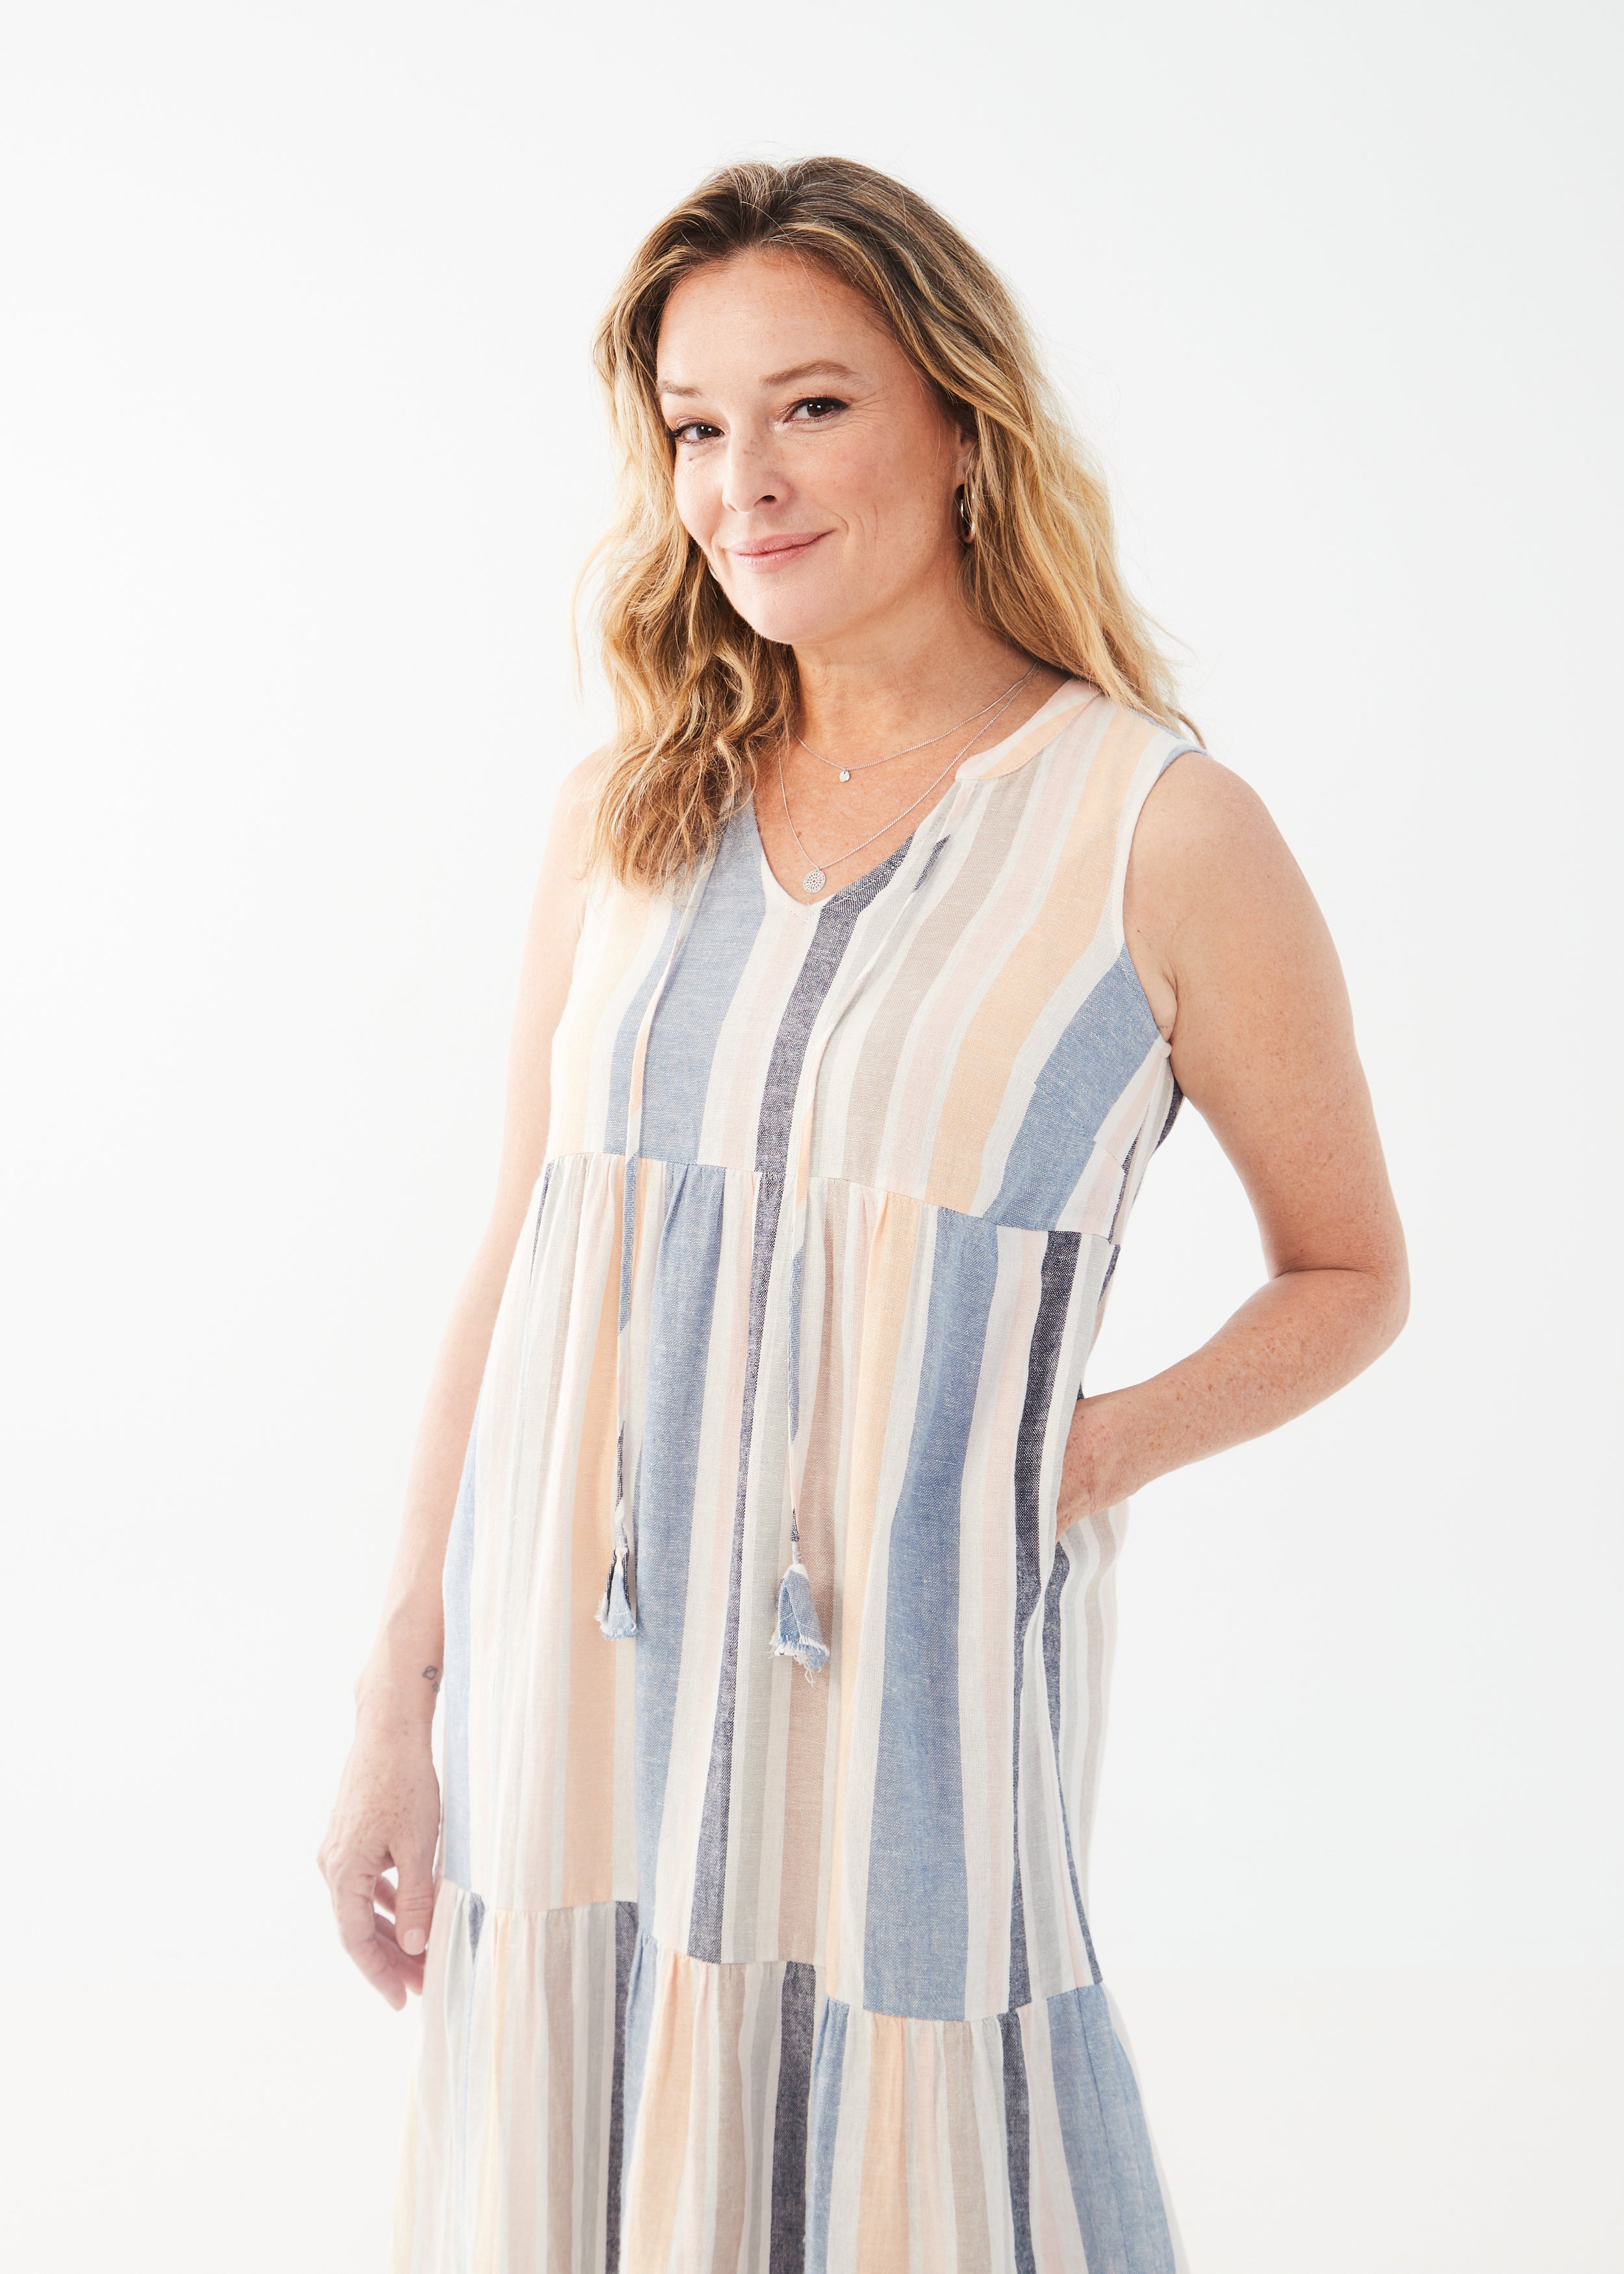 Stay stylish and comfortable in our FDJ Sleeveless Tiered Midi Dress. Perfect for summer with its baha stripe design and linen blend fabric. Plus, it has pockets for added convenience!